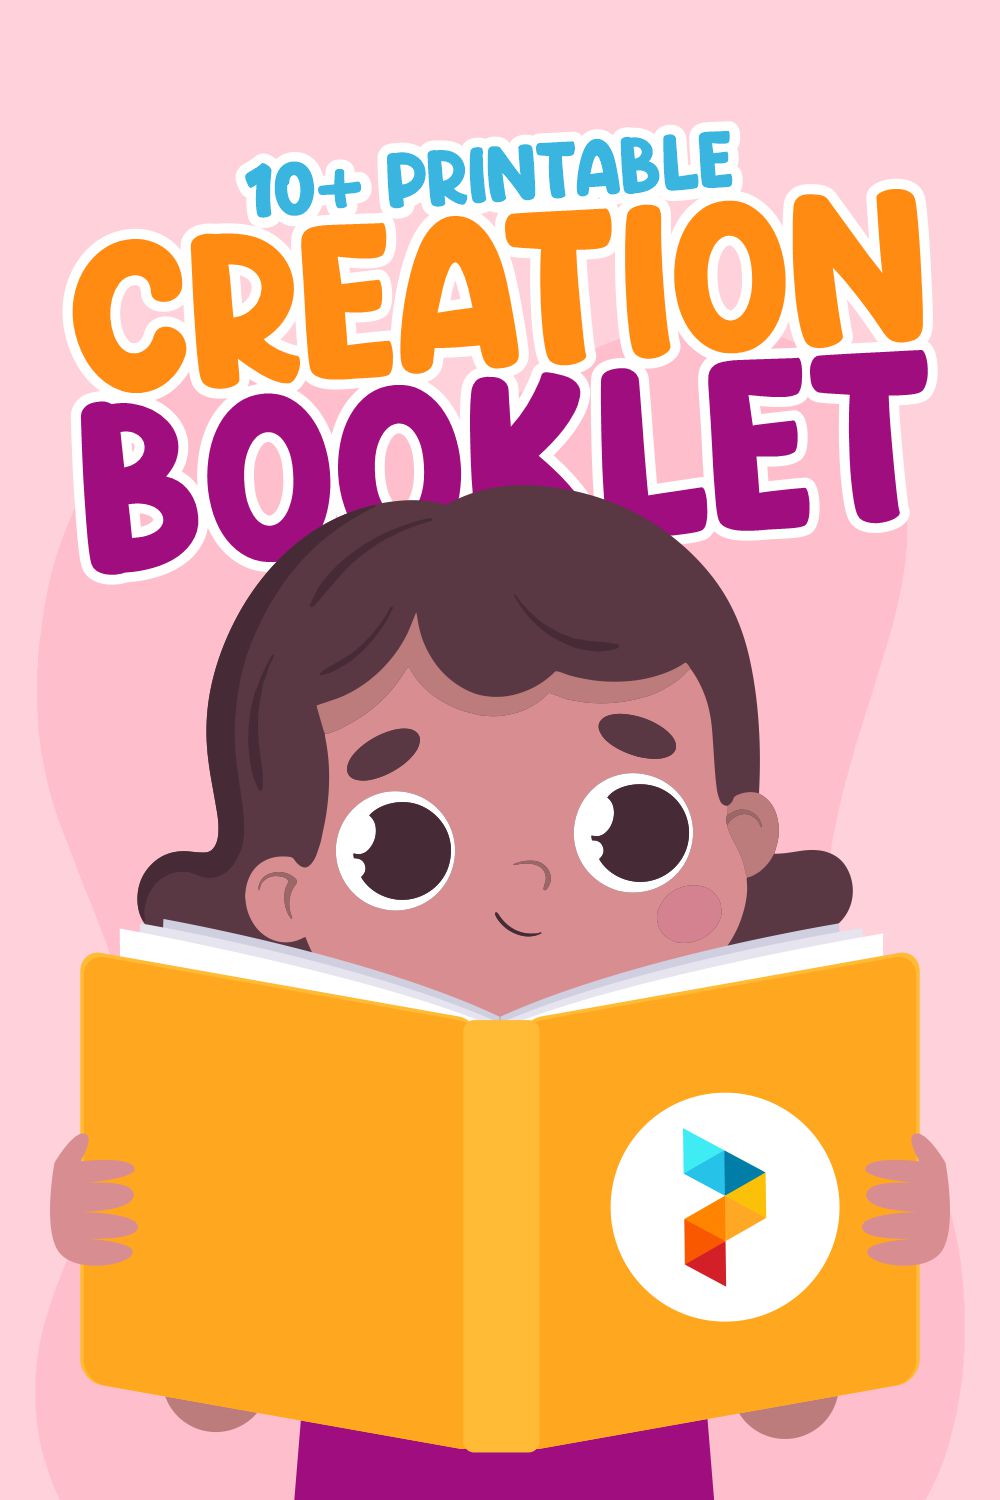 Printable Creation Booklet